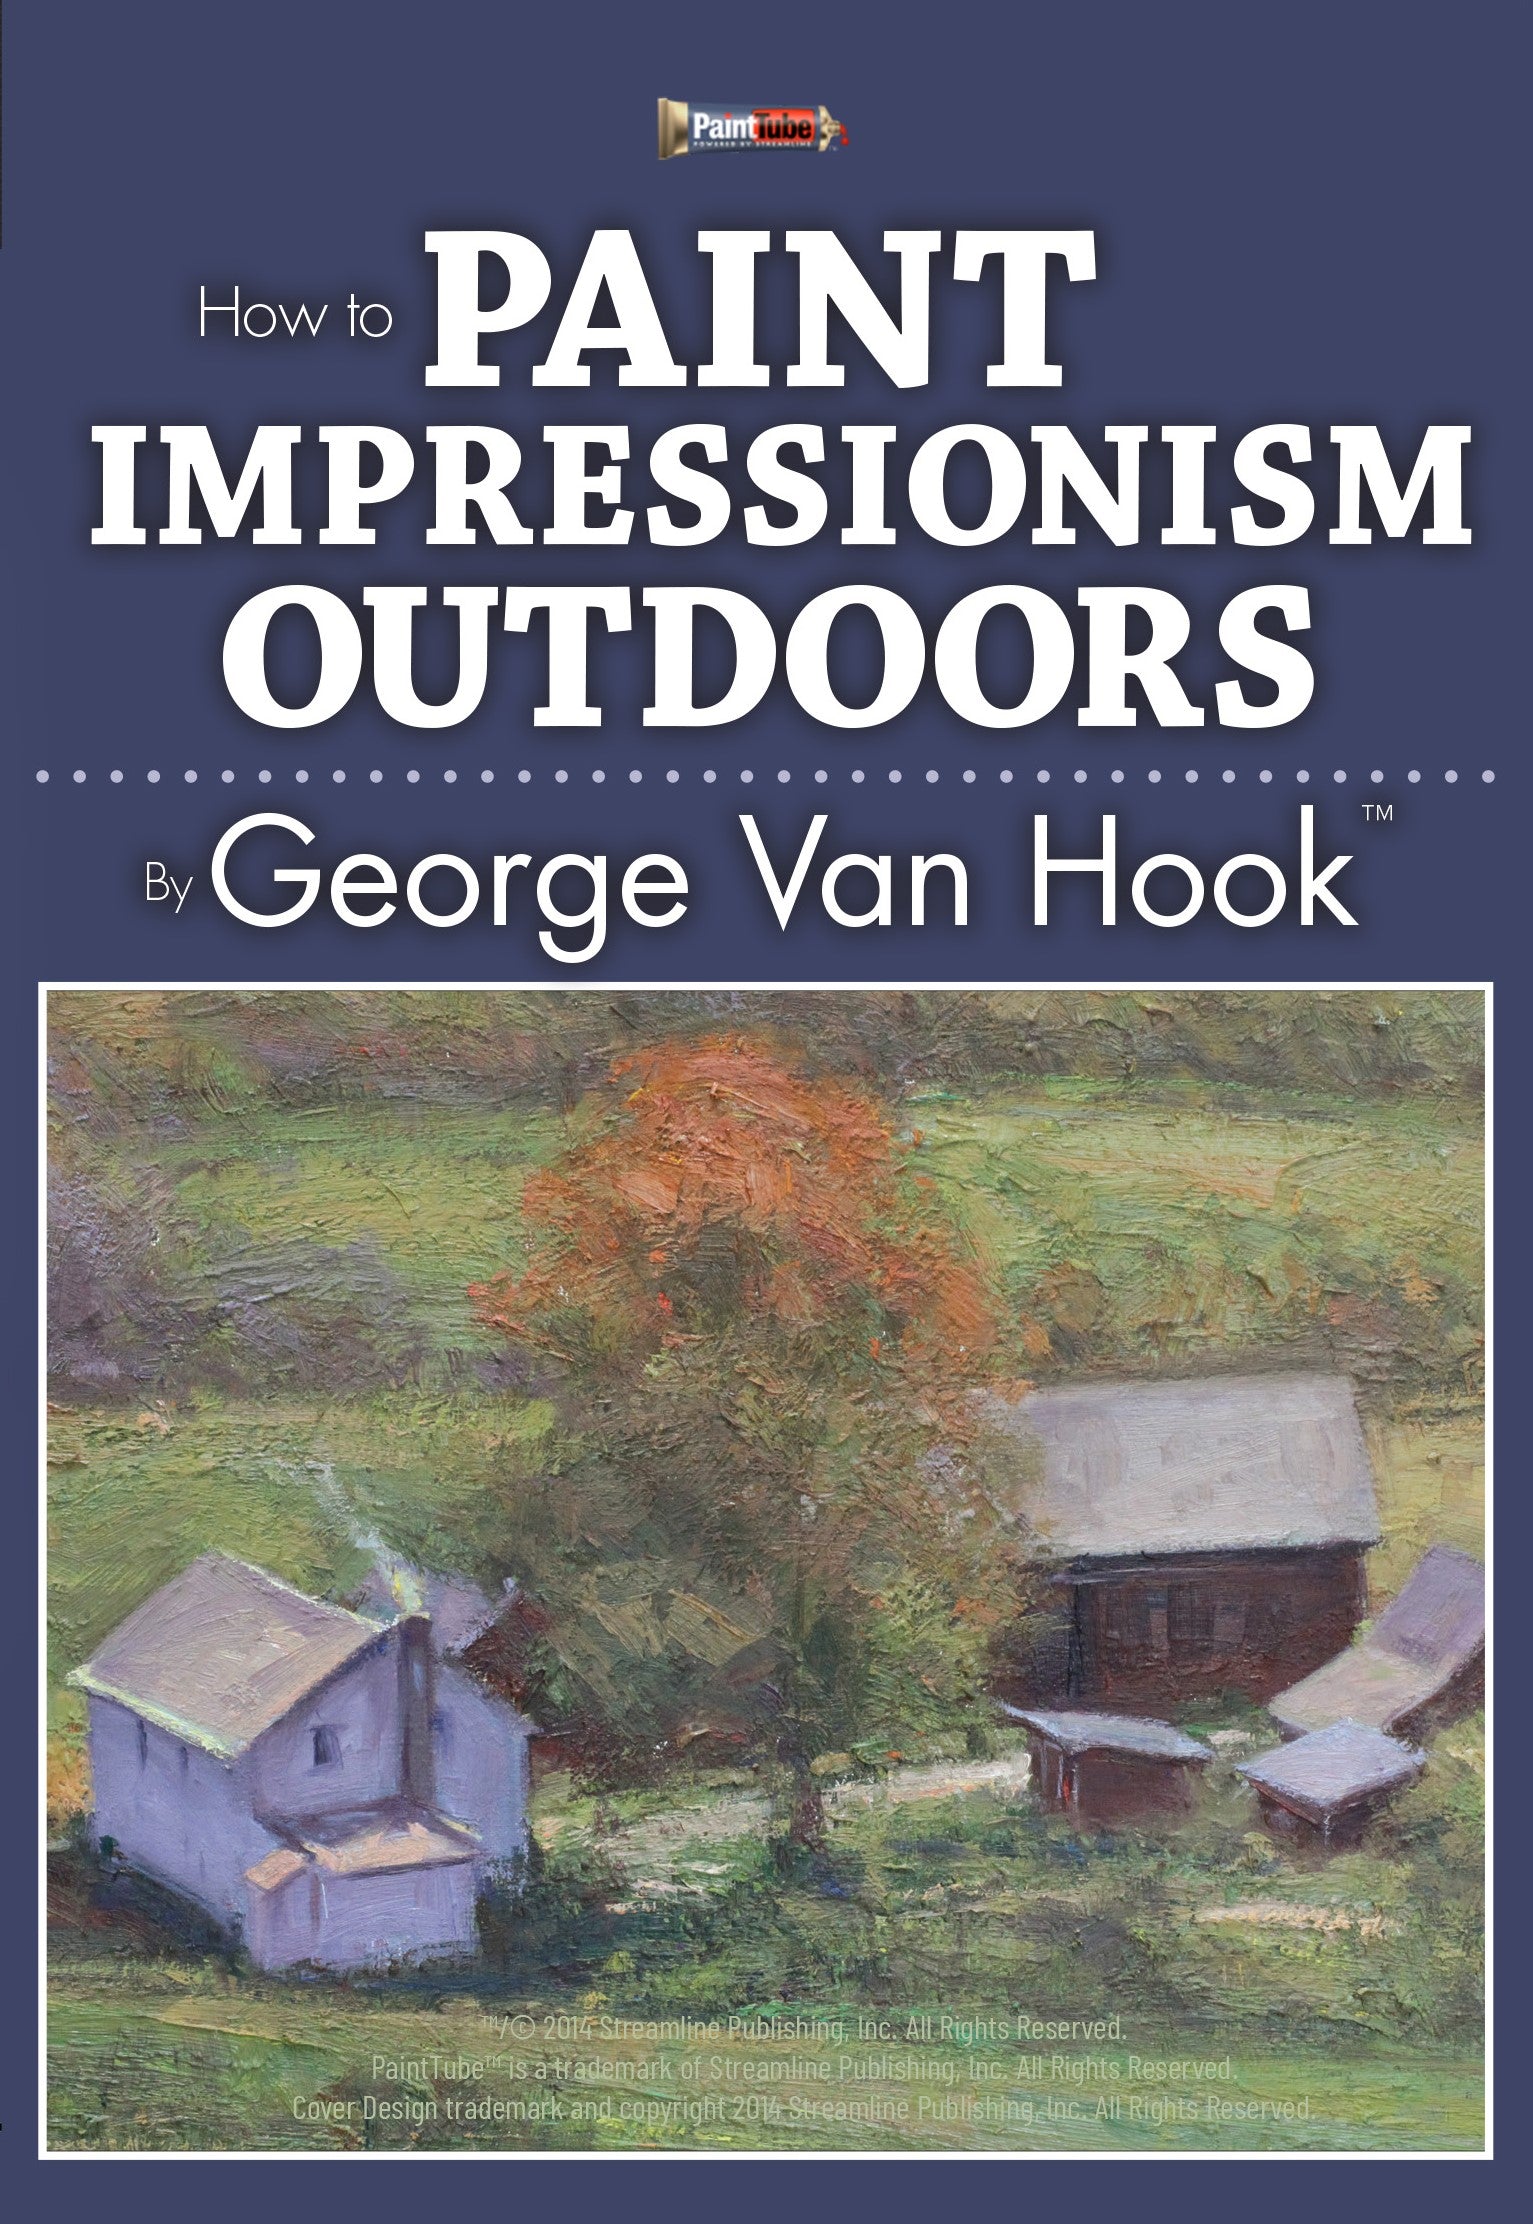 George Van Hook: How to Paint Impressionism Outdoors